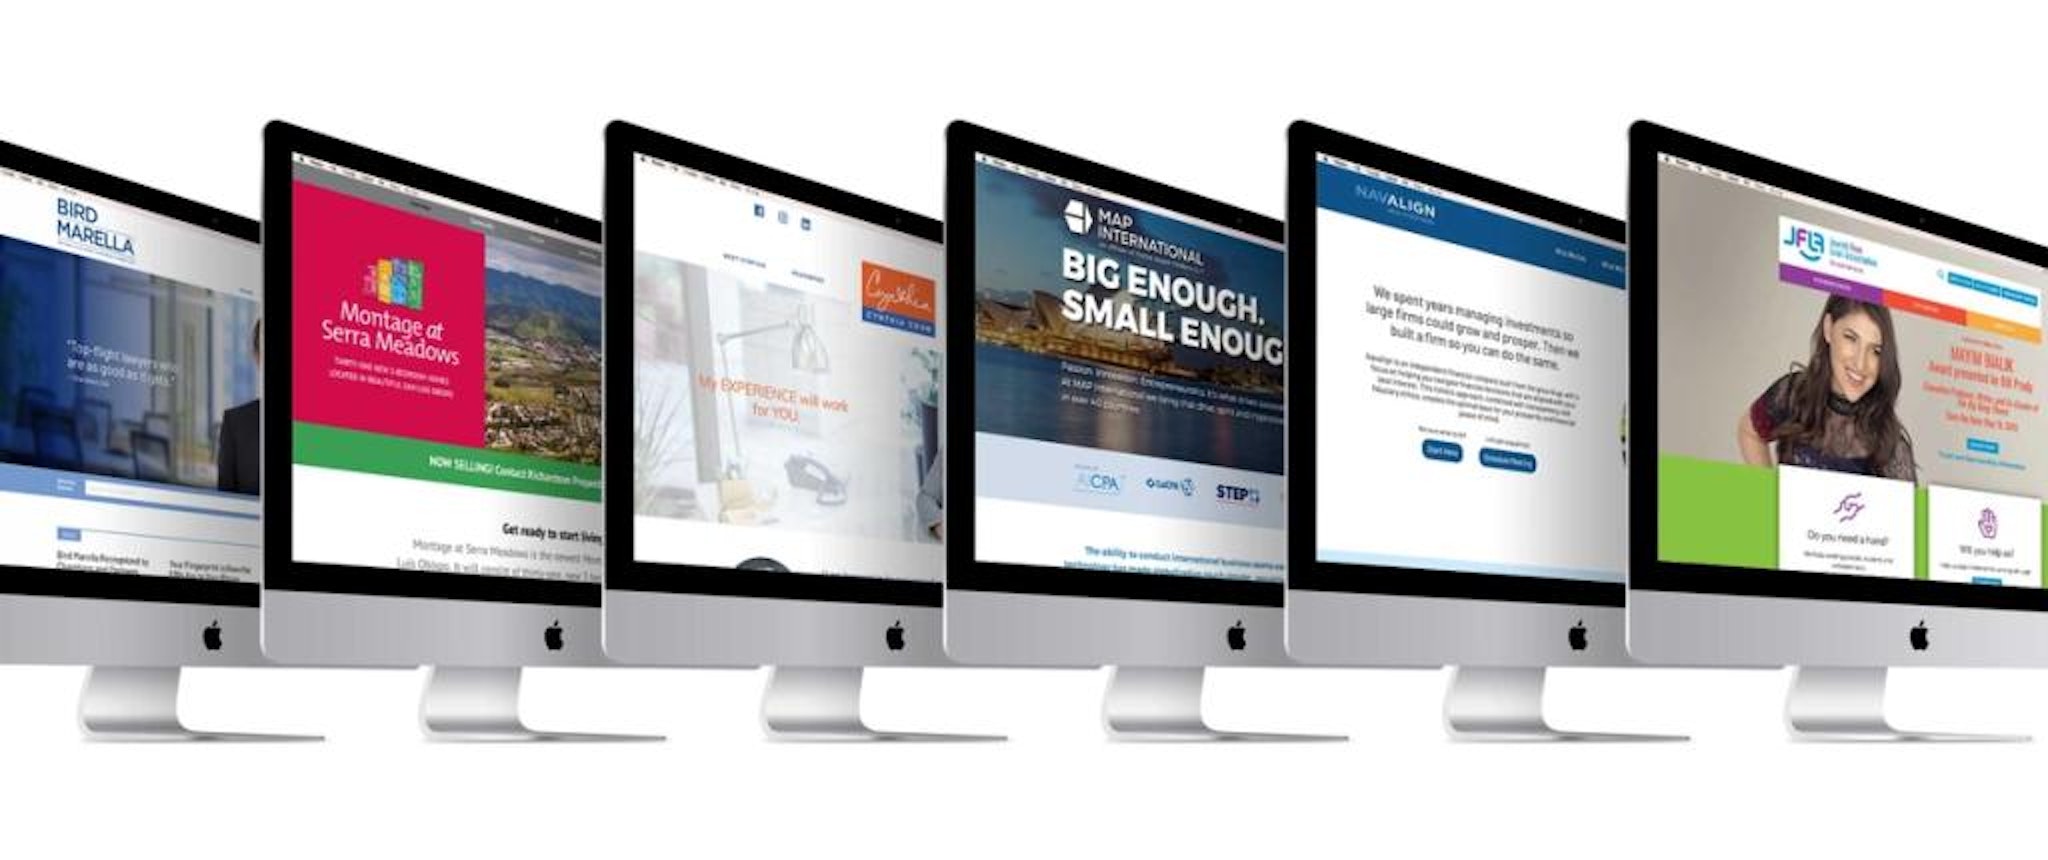 Glyphix has launched 6 new websites so far in 2019.